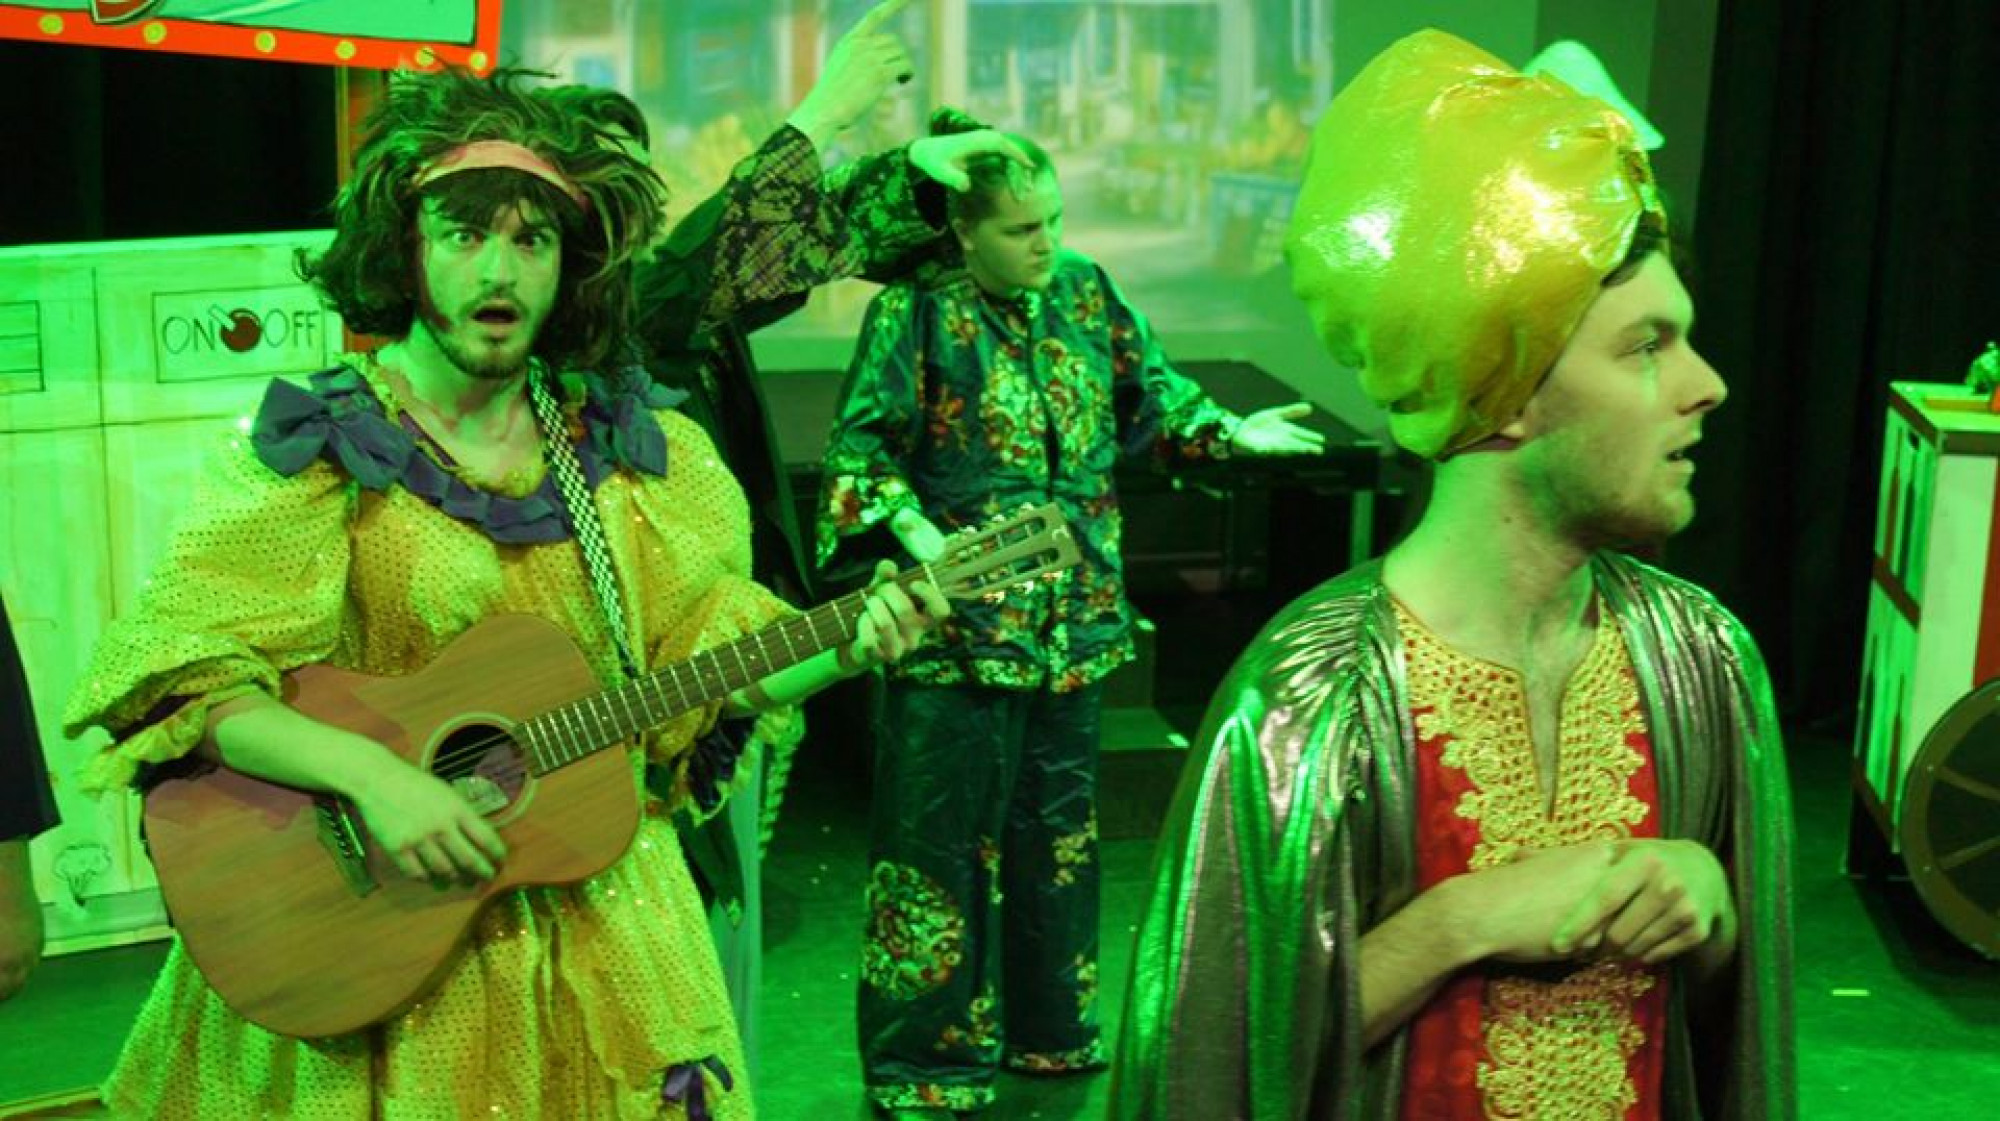 The panto dame plays a guitar, while the villain looks offstage.